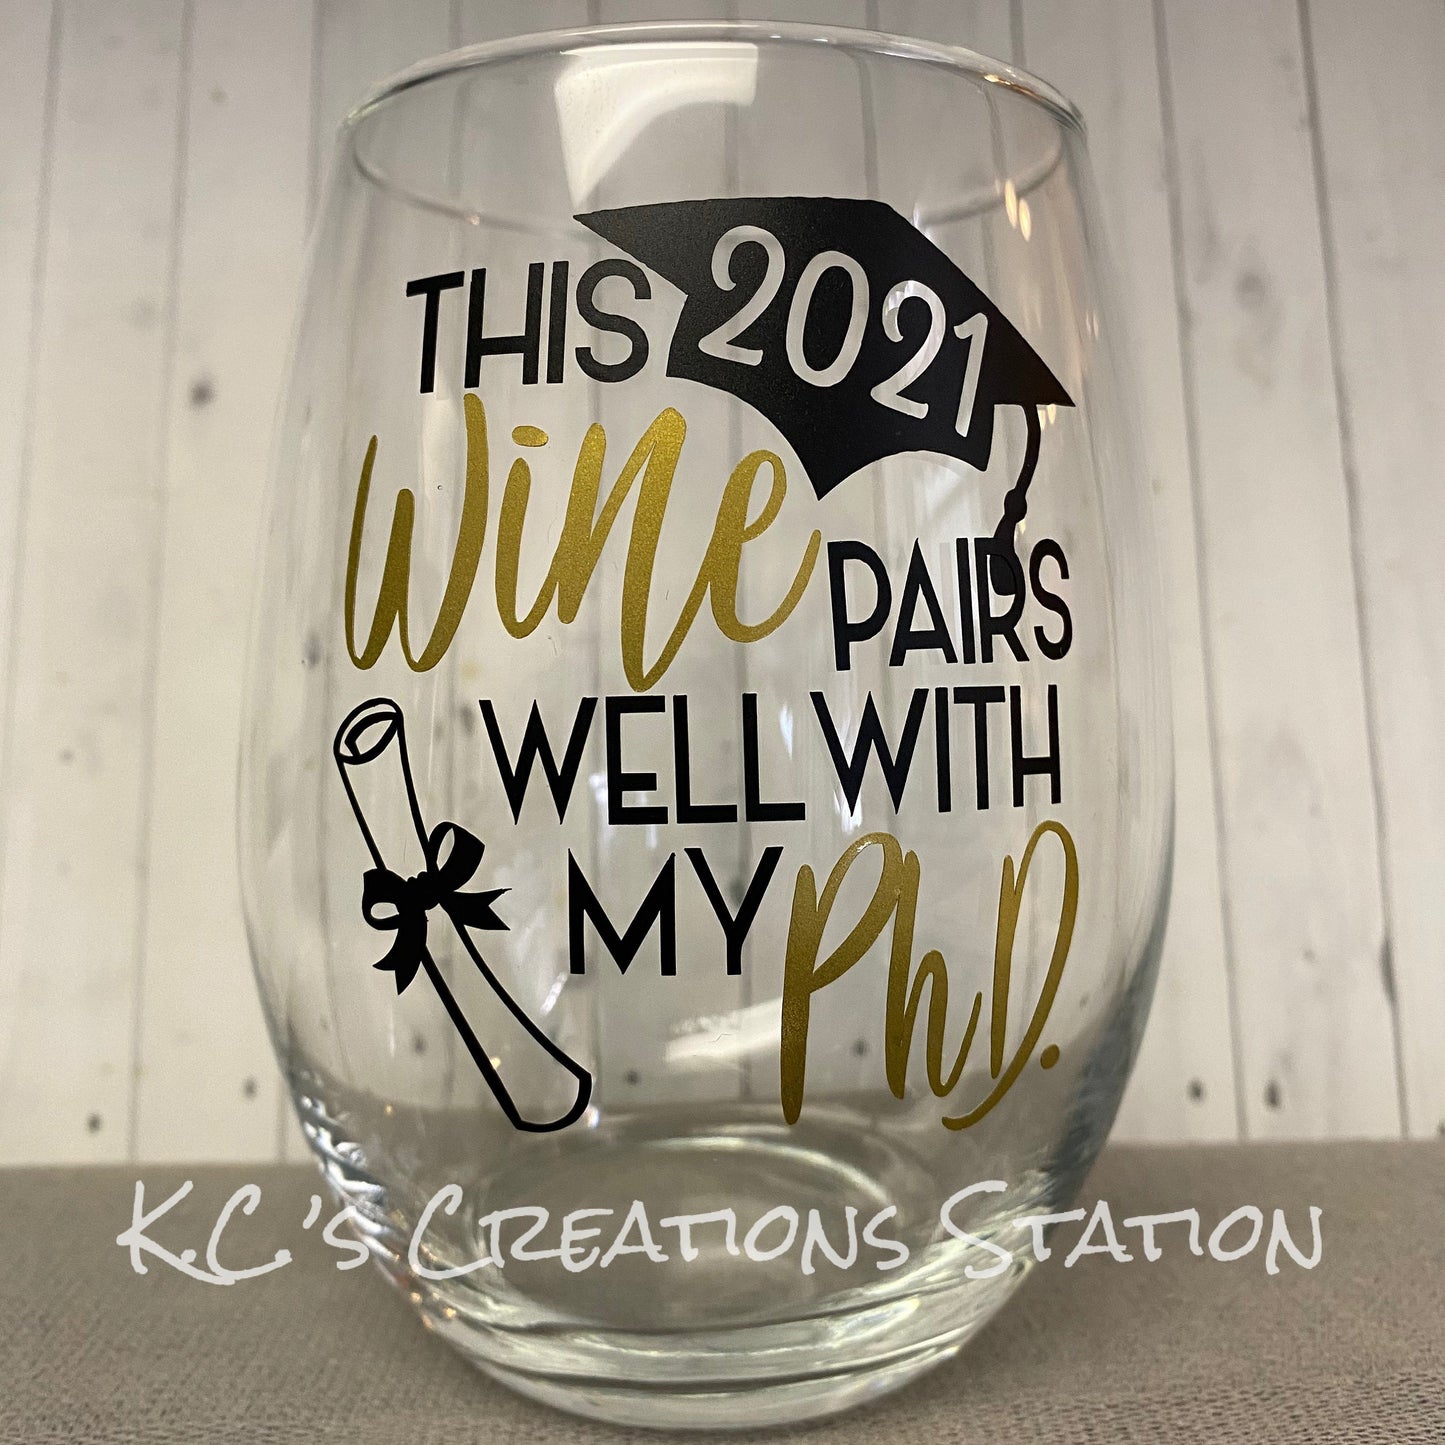 This wine pairs well with my BS, college graduation gift, funny college grad gift, bachelors of science gift, class of 2021